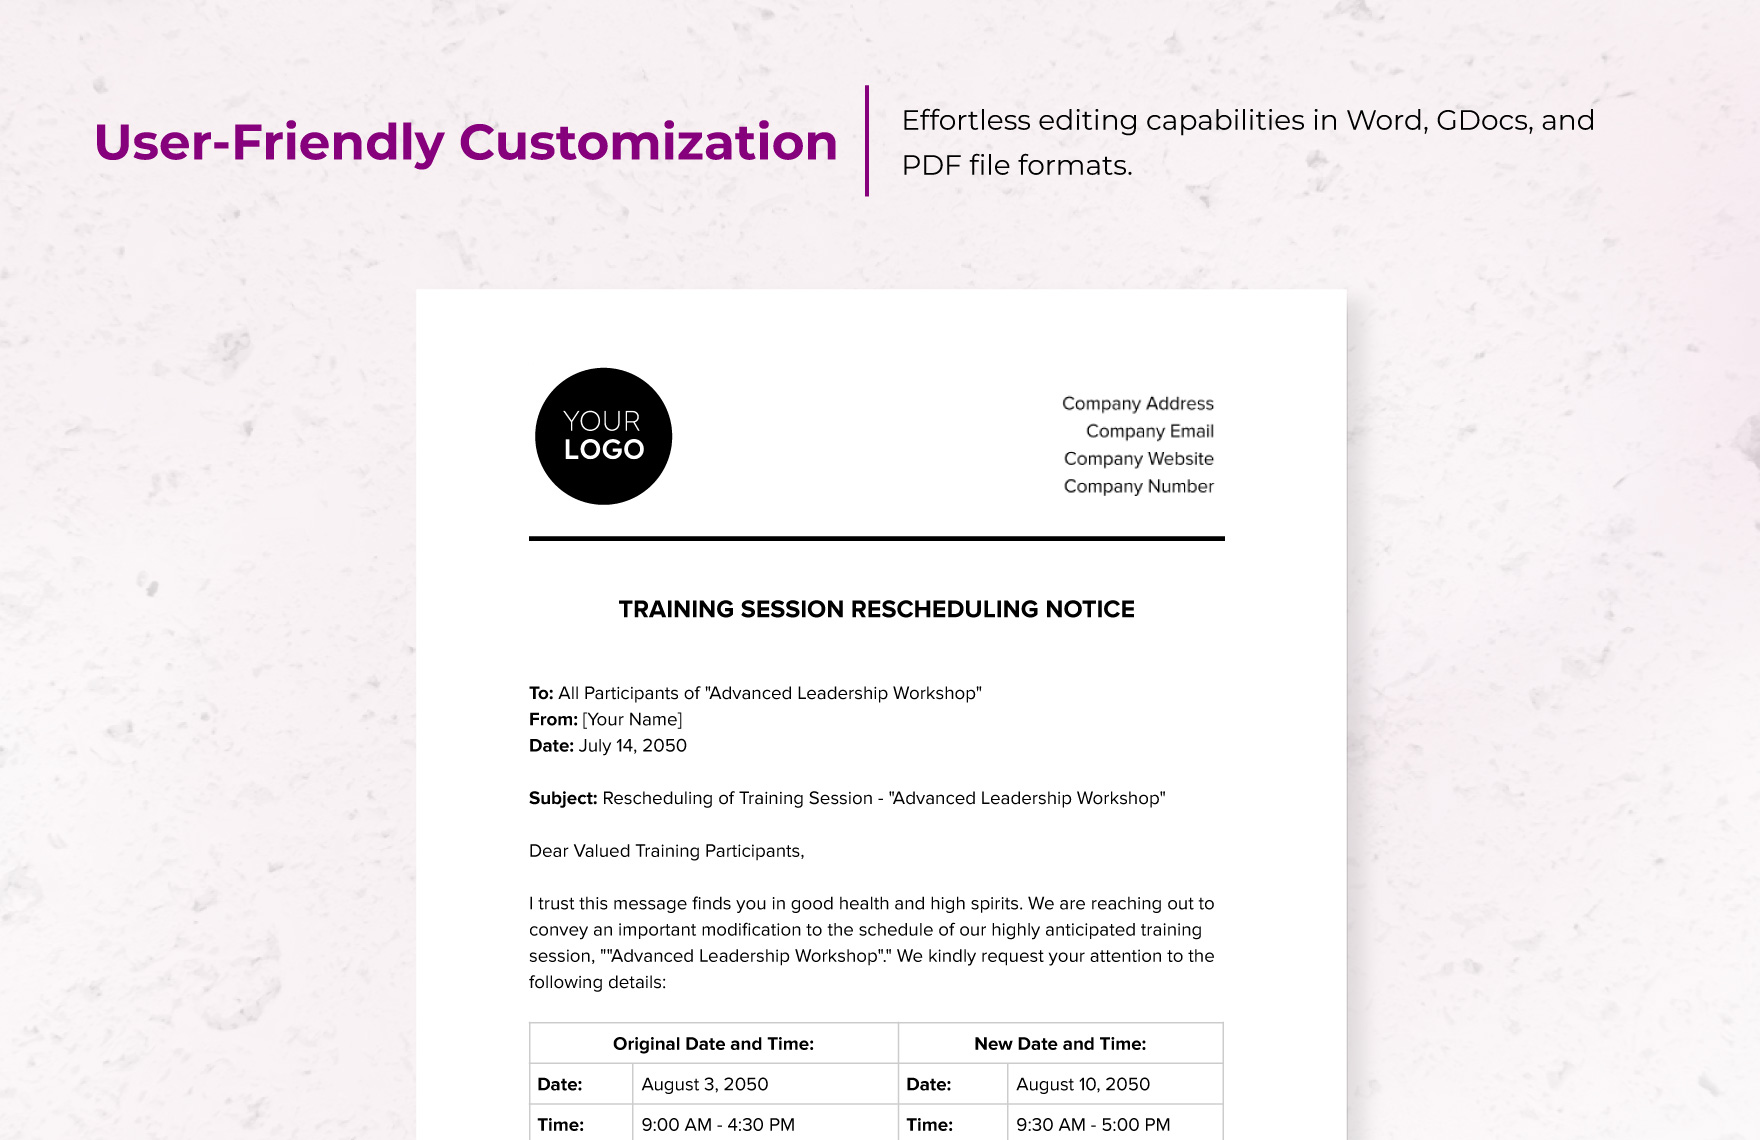 Training Session Rescheduling Notice HR Template